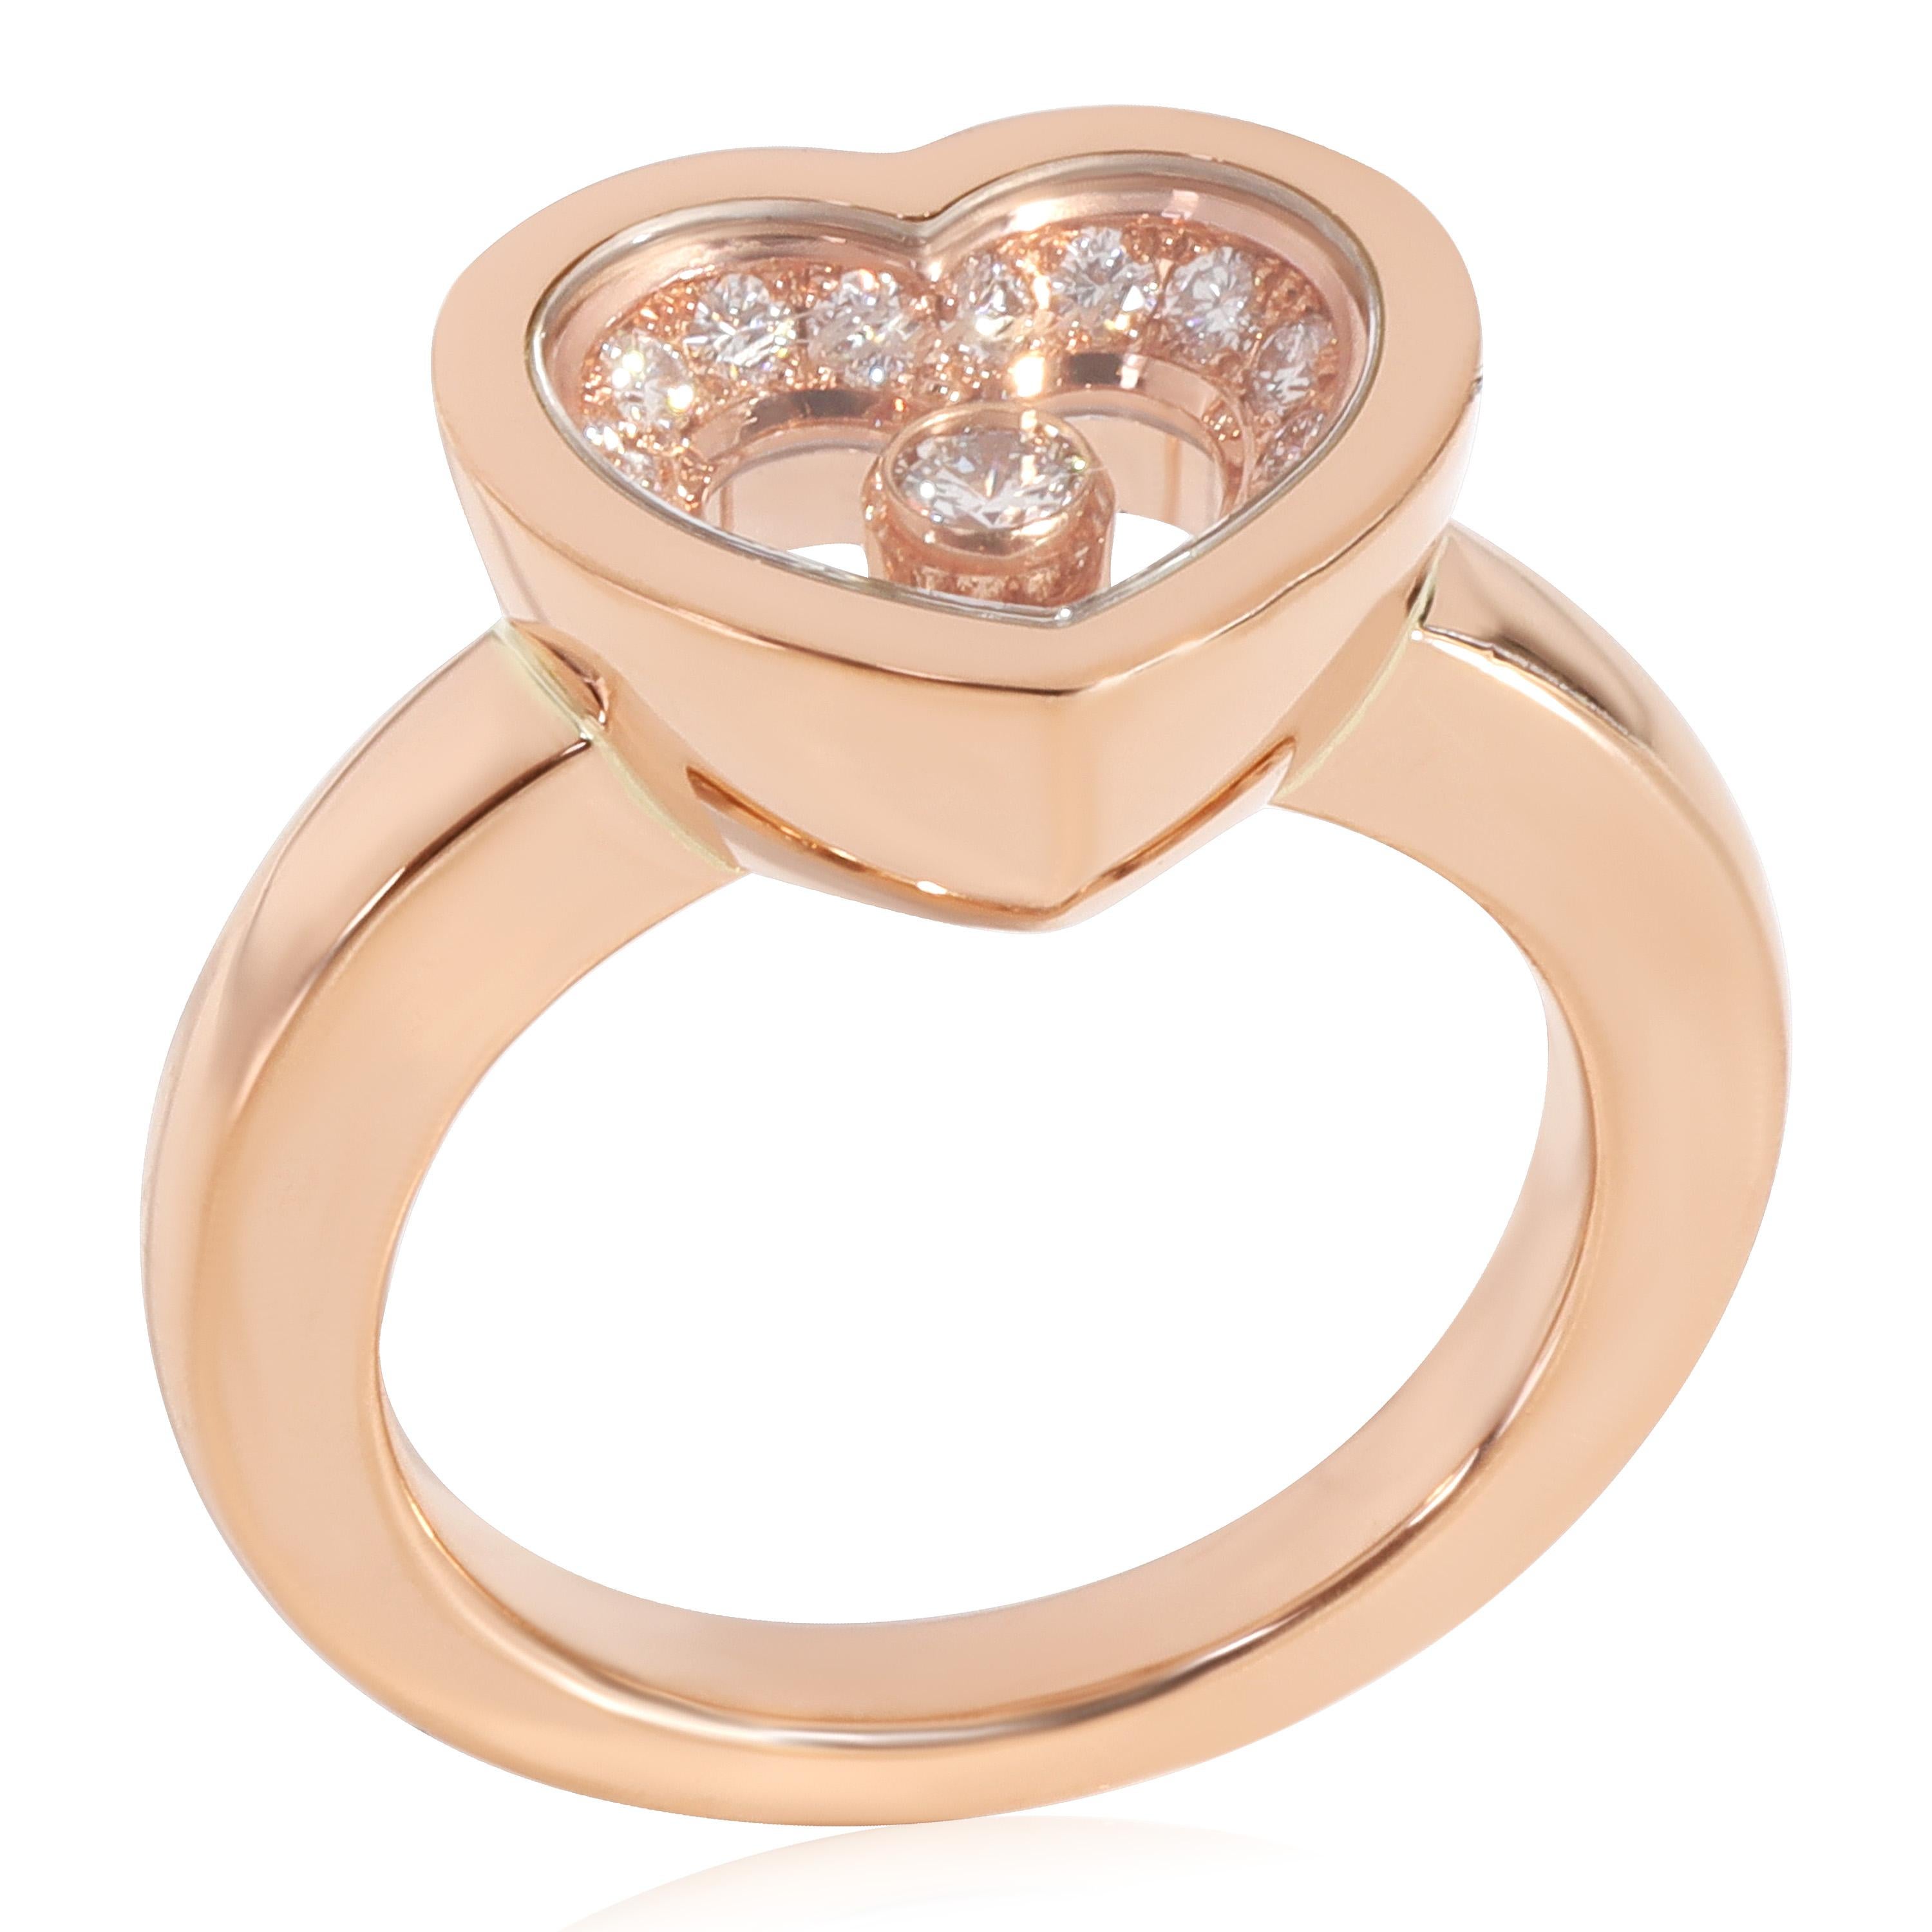 Chopard Happy Diamonds  Ring in 18K Rose Gold 0.24 CTW

PRIMARY DETAILS
SKU: 118150
Listing Title: Chopard Happy Diamonds  Ring in 18K Rose Gold 0.24 CTW
Condition Description: Retails for 5990 USD. In excellent condition and recently polished. Ring